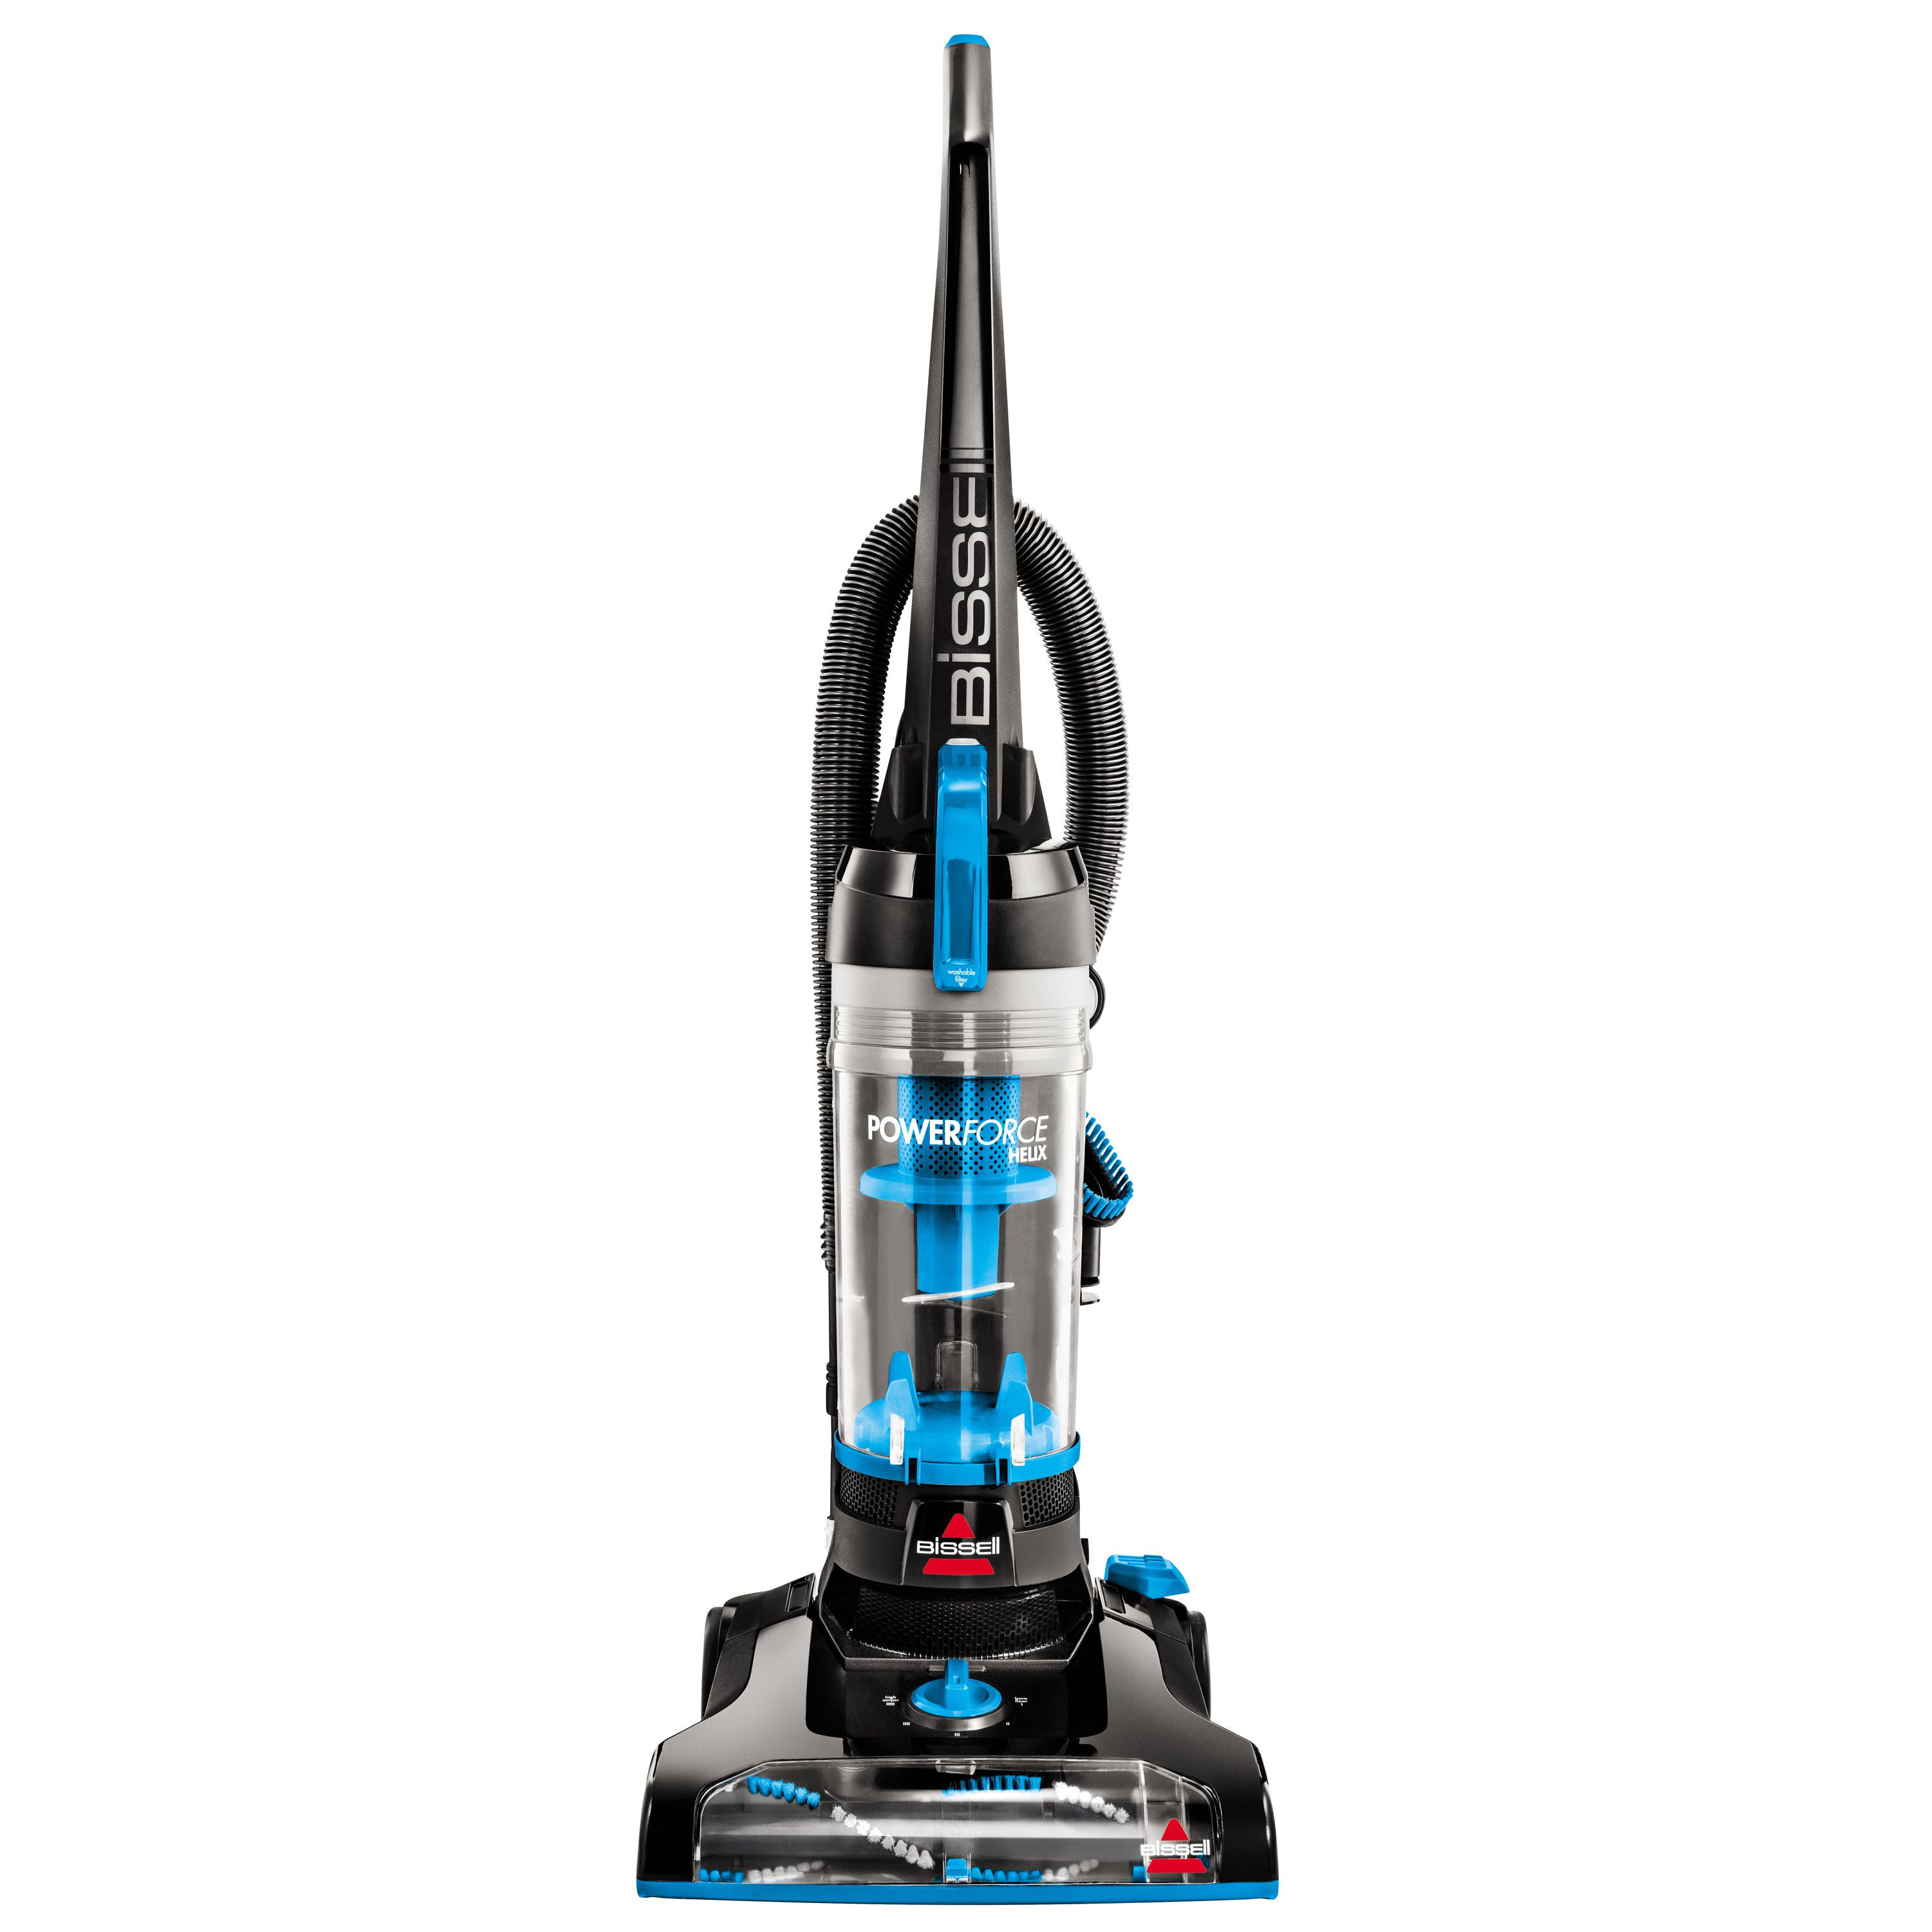 18 Stylish Best Hardwood Floor Vacuum 2017 2024 free download best hardwood floor vacuum 2017 of the 10 best vacuum cleaners to buy in 2018 with regard to e4b12fd4 906f 4bf0 a270 afe8dc531860 1 c698176588ad49a4cf1bde639e9a838a 5bace08ac9e77c00257d9454